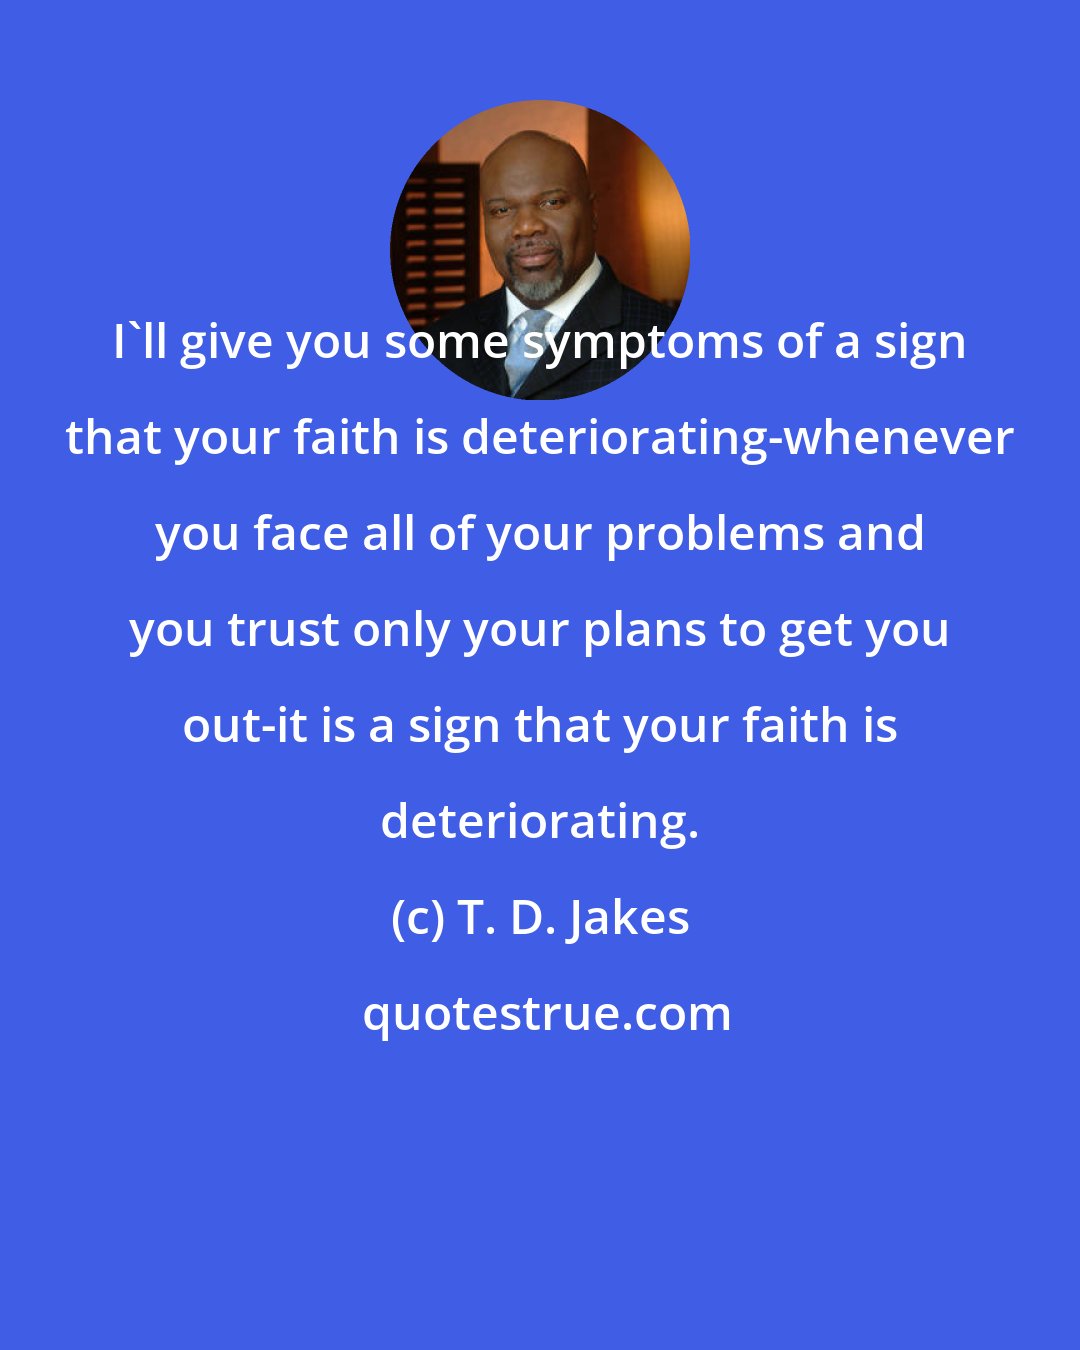 T. D. Jakes: I'll give you some symptoms of a sign that your faith is deteriorating-whenever you face all of your problems and you trust only your plans to get you out-it is a sign that your faith is deteriorating.